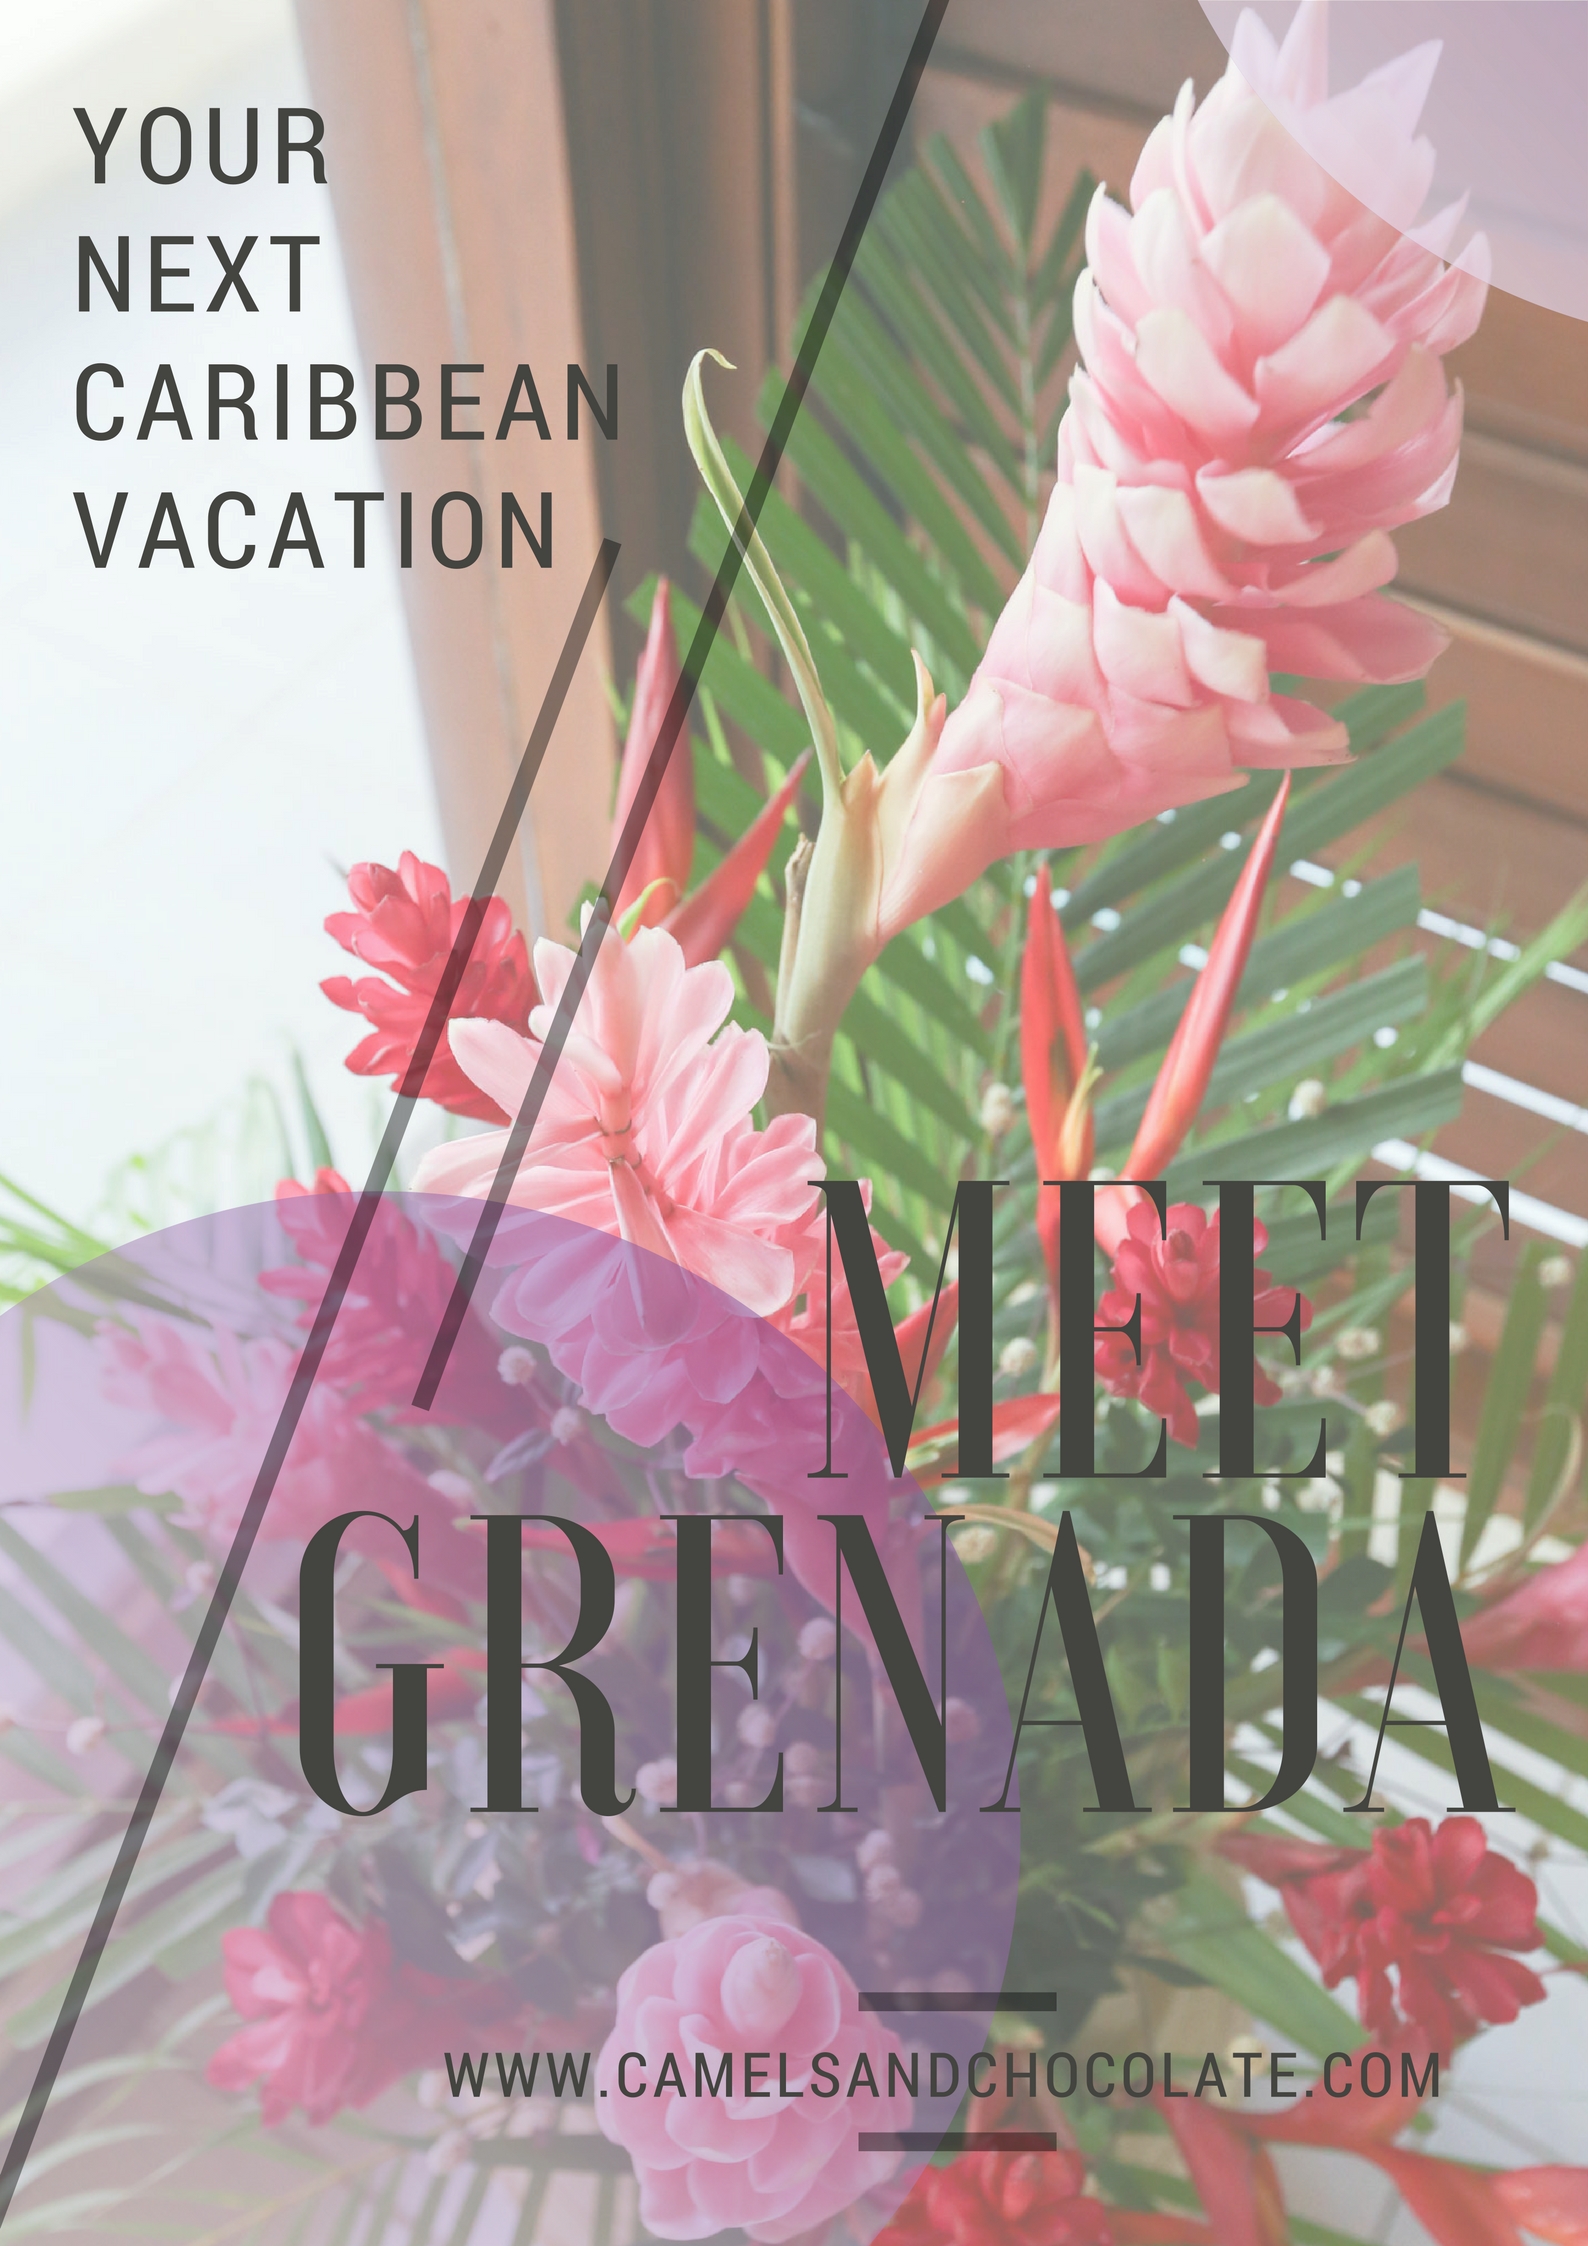 Why Your Next Caribbean Vacation Should Be Grenada